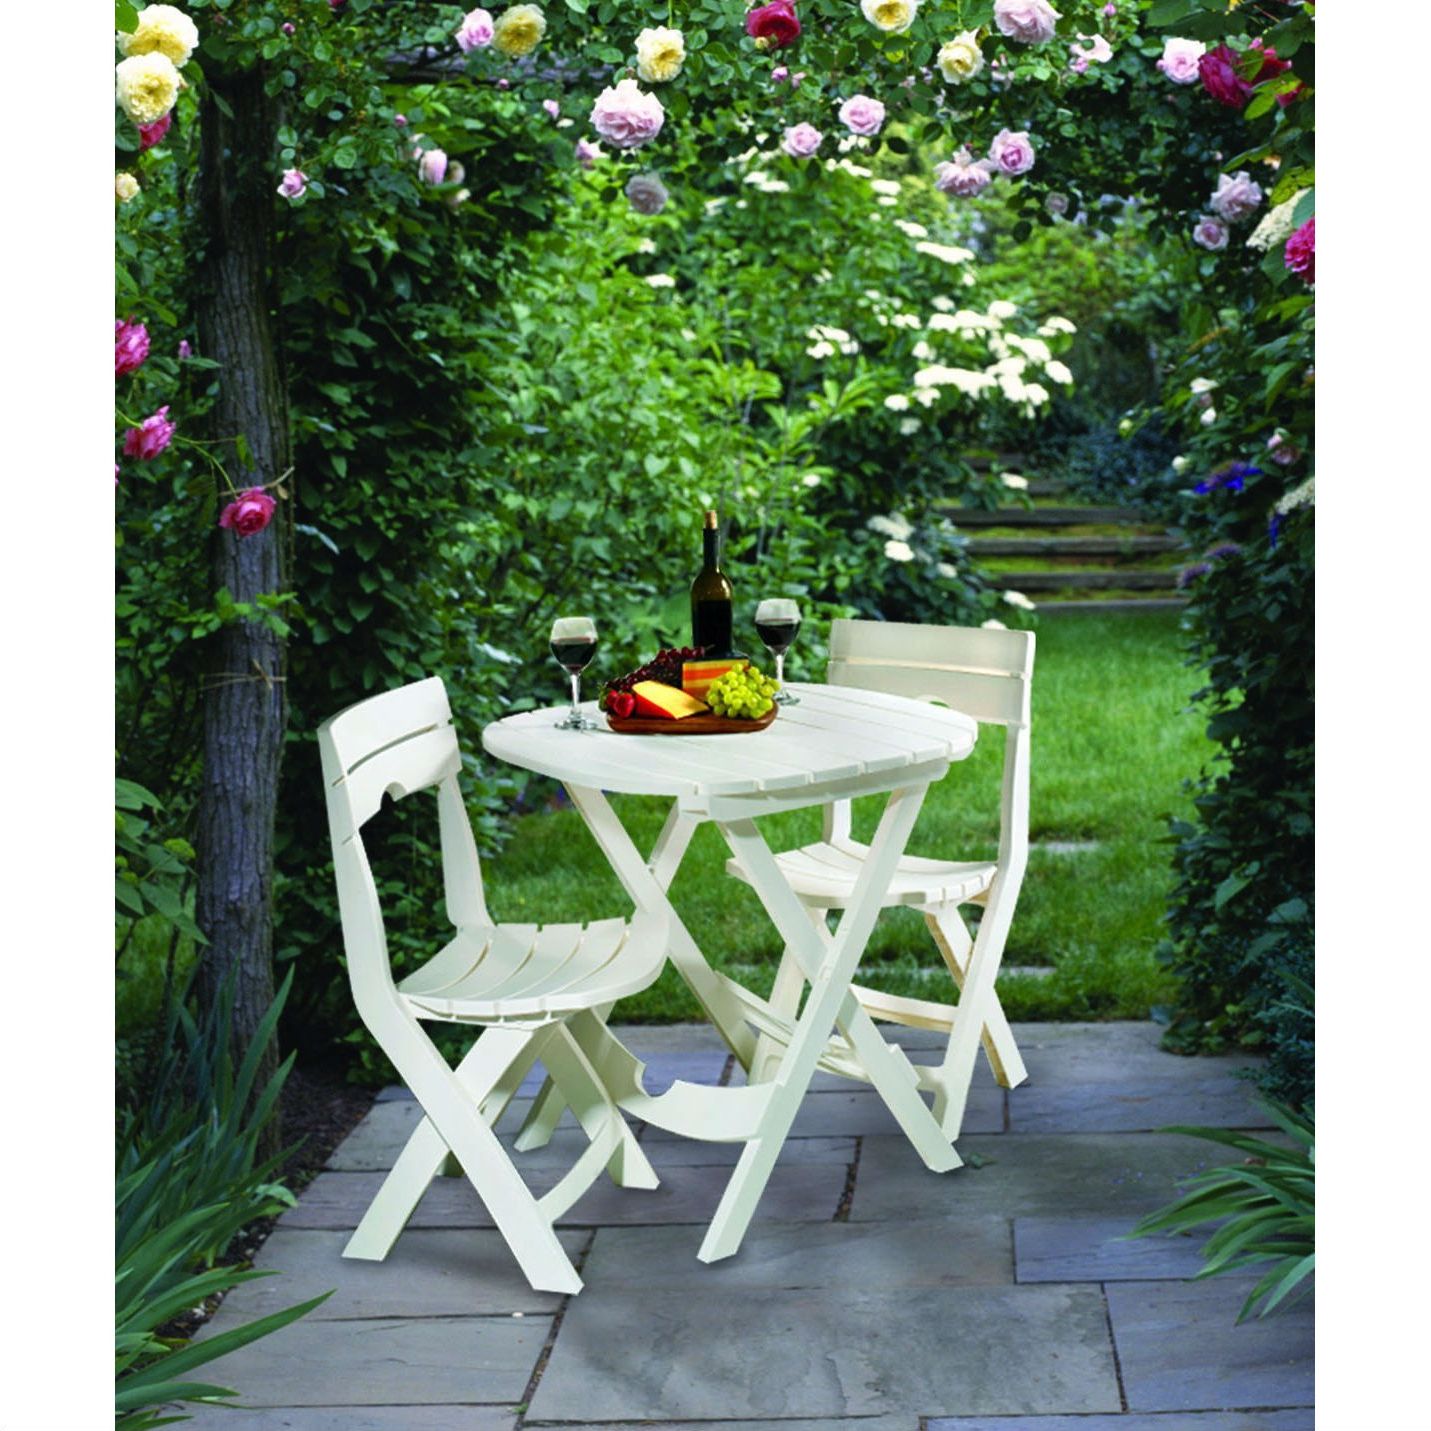 3 Piece Patio Bistro Sets Within Newest 3 Piece Folding Outdoor Patio Furniture Bistro Set In White (View 13 of 15)